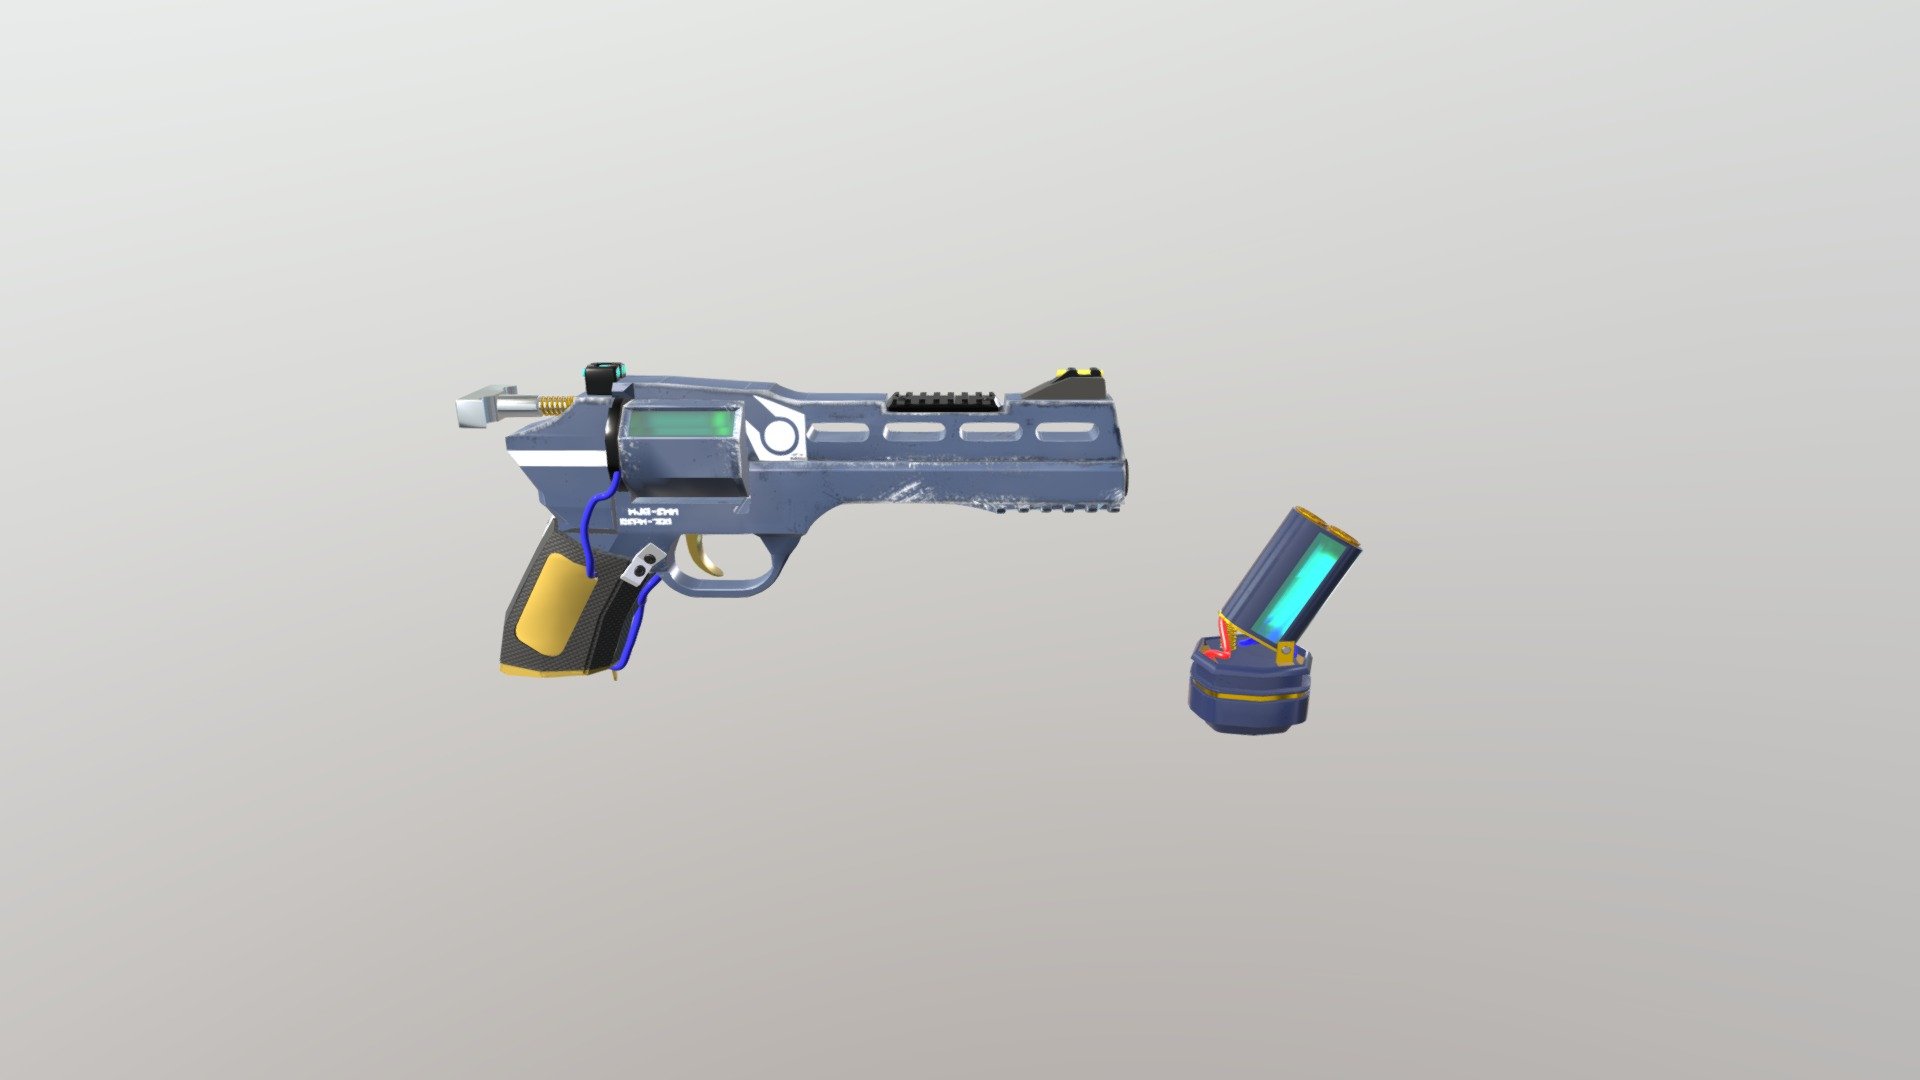 The Overwatch Synthetic pulsemagnum Revision-70A.

An energy slug magnum.

Rarely if ever does prototype Combine Elite weaponry get in the hands of rebels, This version has it's genetic bonding process crudely bypassed with human technology. Overwatch is after it to discern his bypassing technique to patch it out of future iterations. They say the old owner used to call it the Slugnum, But you can call it &ldquo;The Overwatch Synthetic pulsemagnum -70A